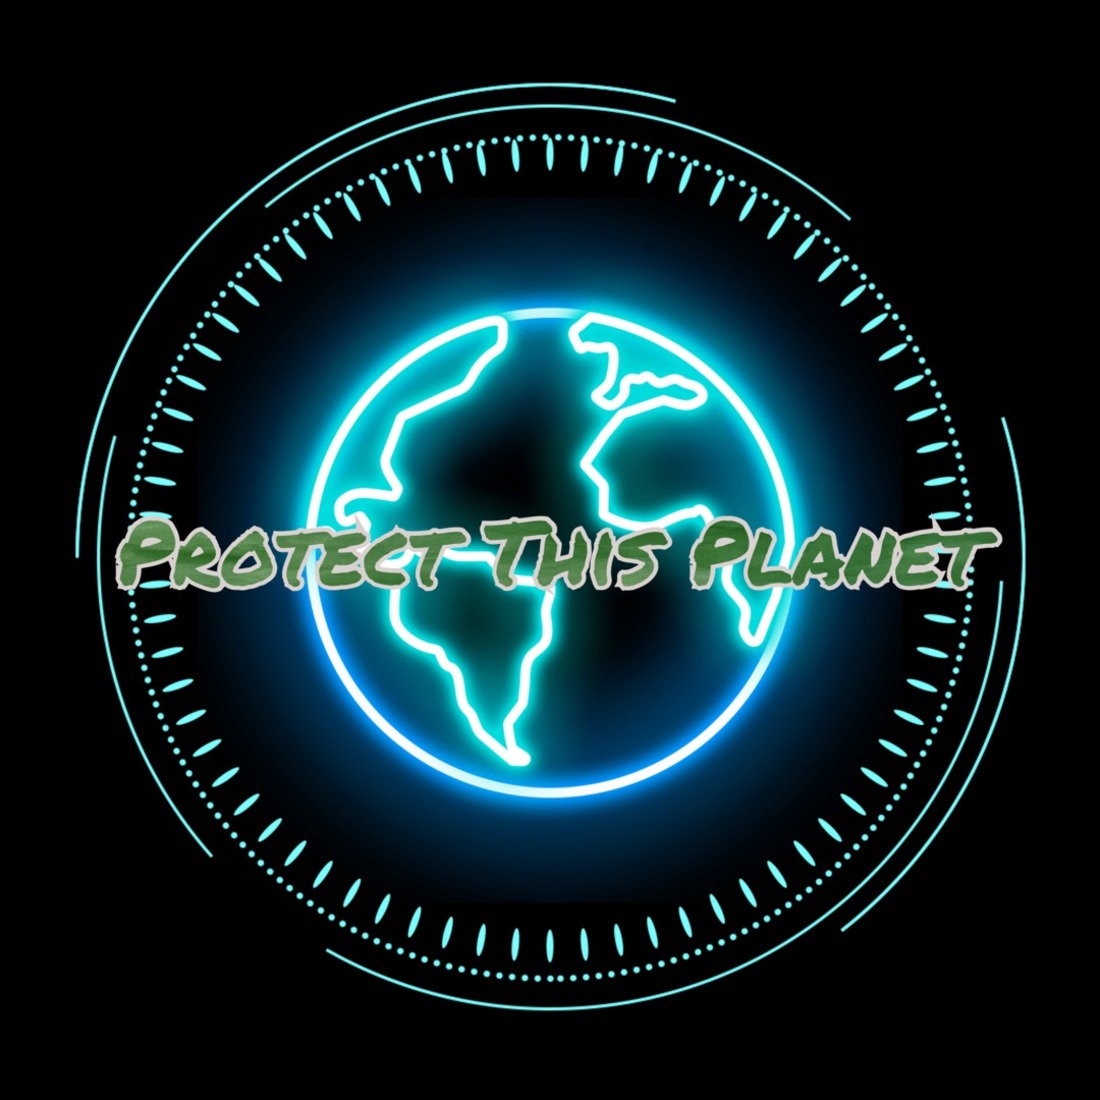 Planet Logos preview image.